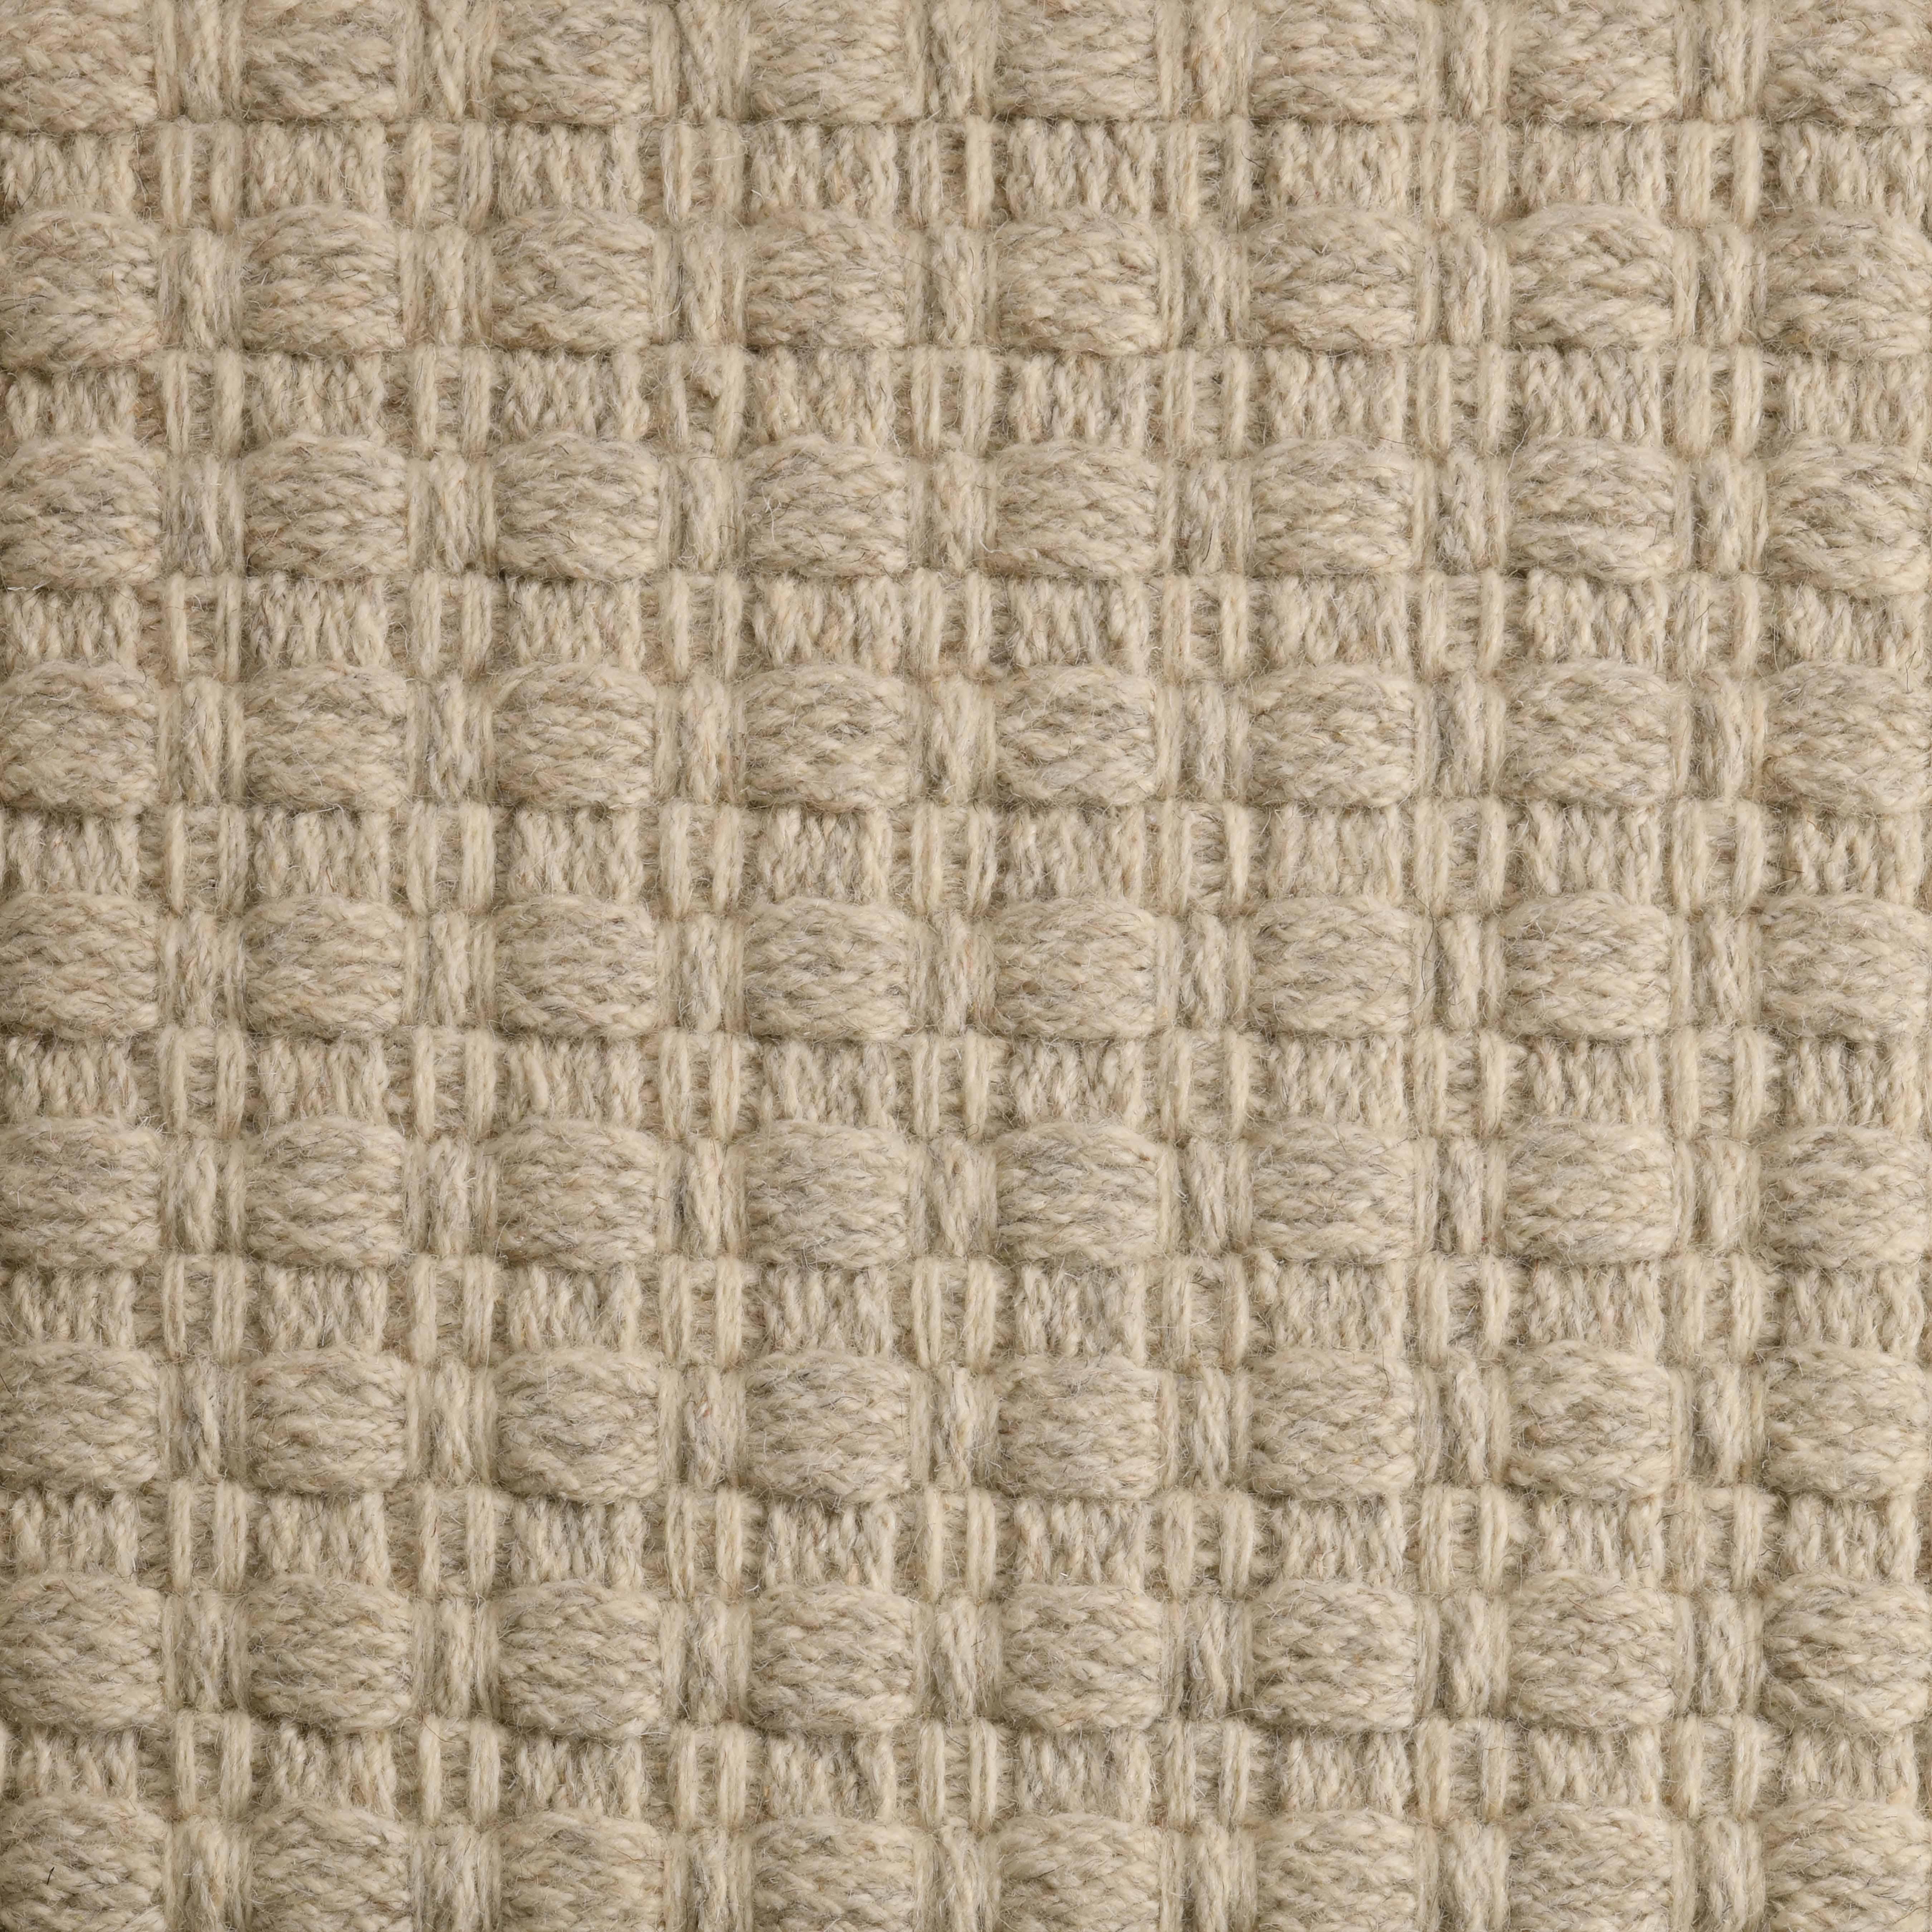 Una, Ash, Handwoven Face 60% Undyed NZ Wool, 40% Undyed MED Wool, 6' x 9' For Sale